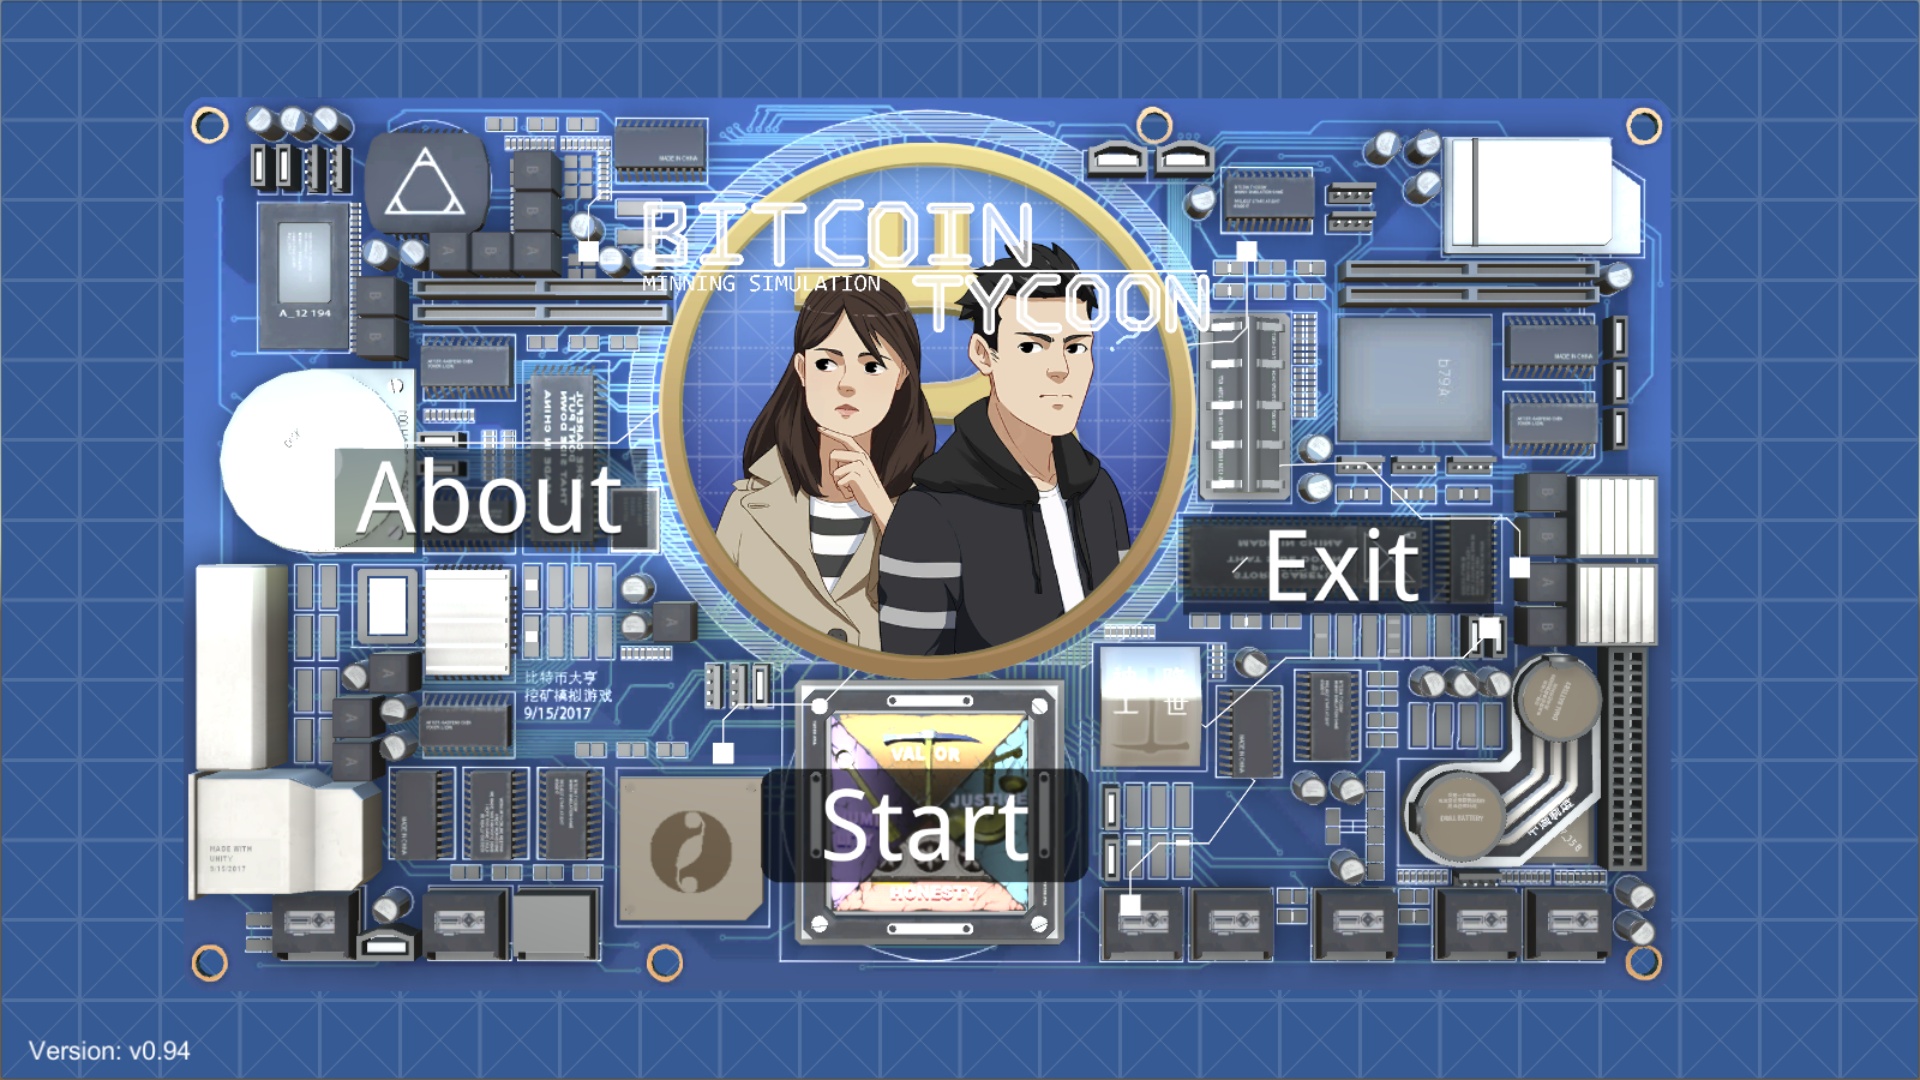 Bitcoin Tycoon-Mining Simulation Game - VICE